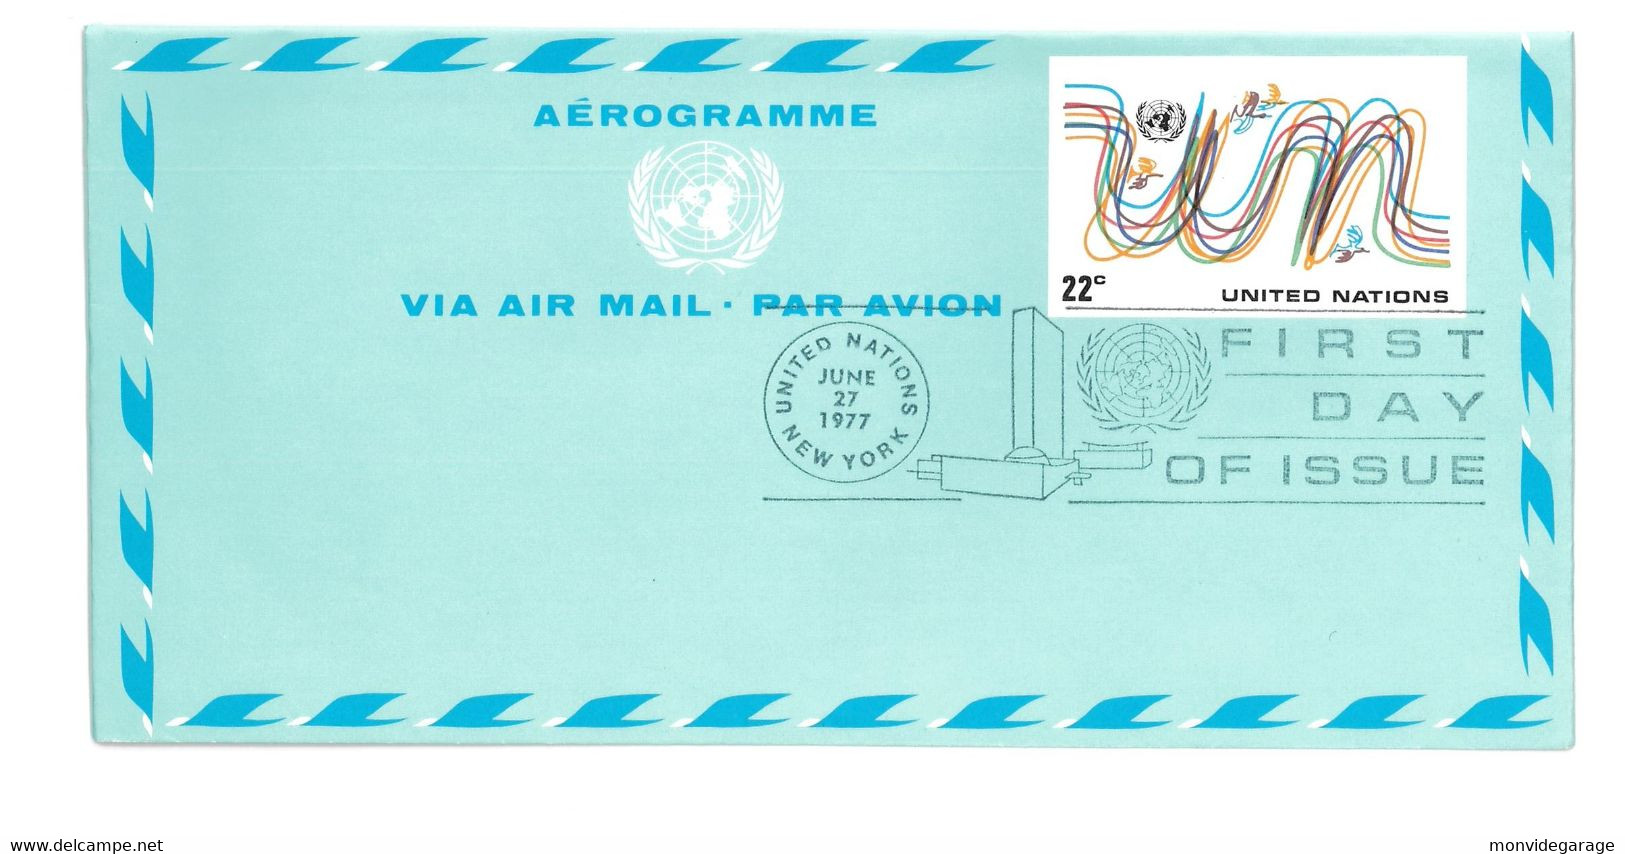 United Nations - Aérogramme - Via Air Mail - Par Avion - First Day Of Issue - 1977 - New York 093 - Poste Aérienne